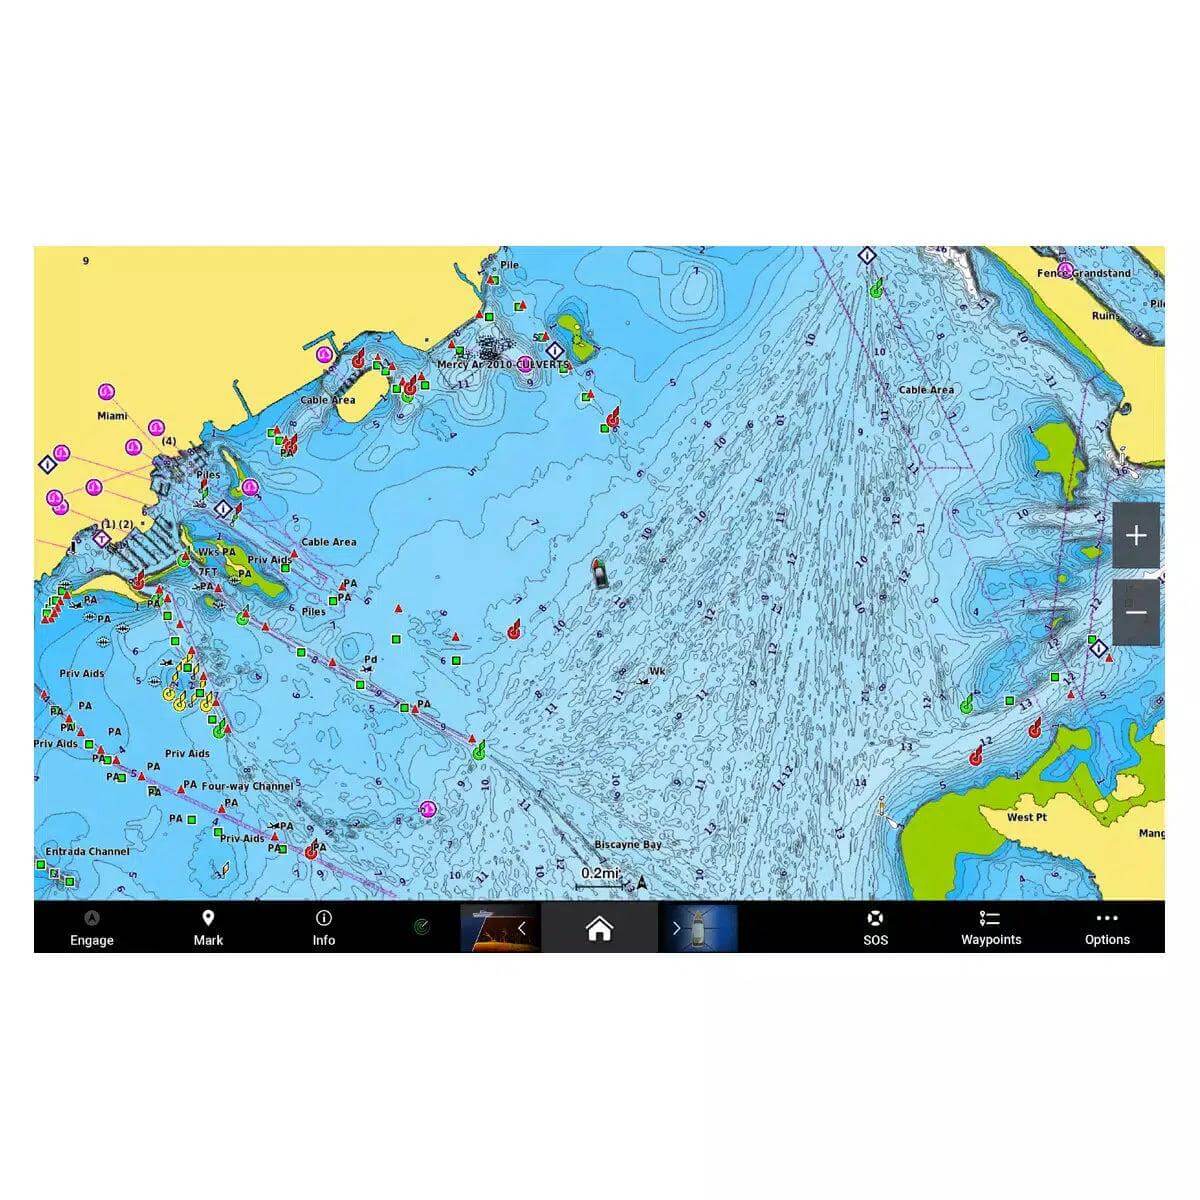 Finding Hidden Fishing Spots Using Shaded-Relief Electronic Charts